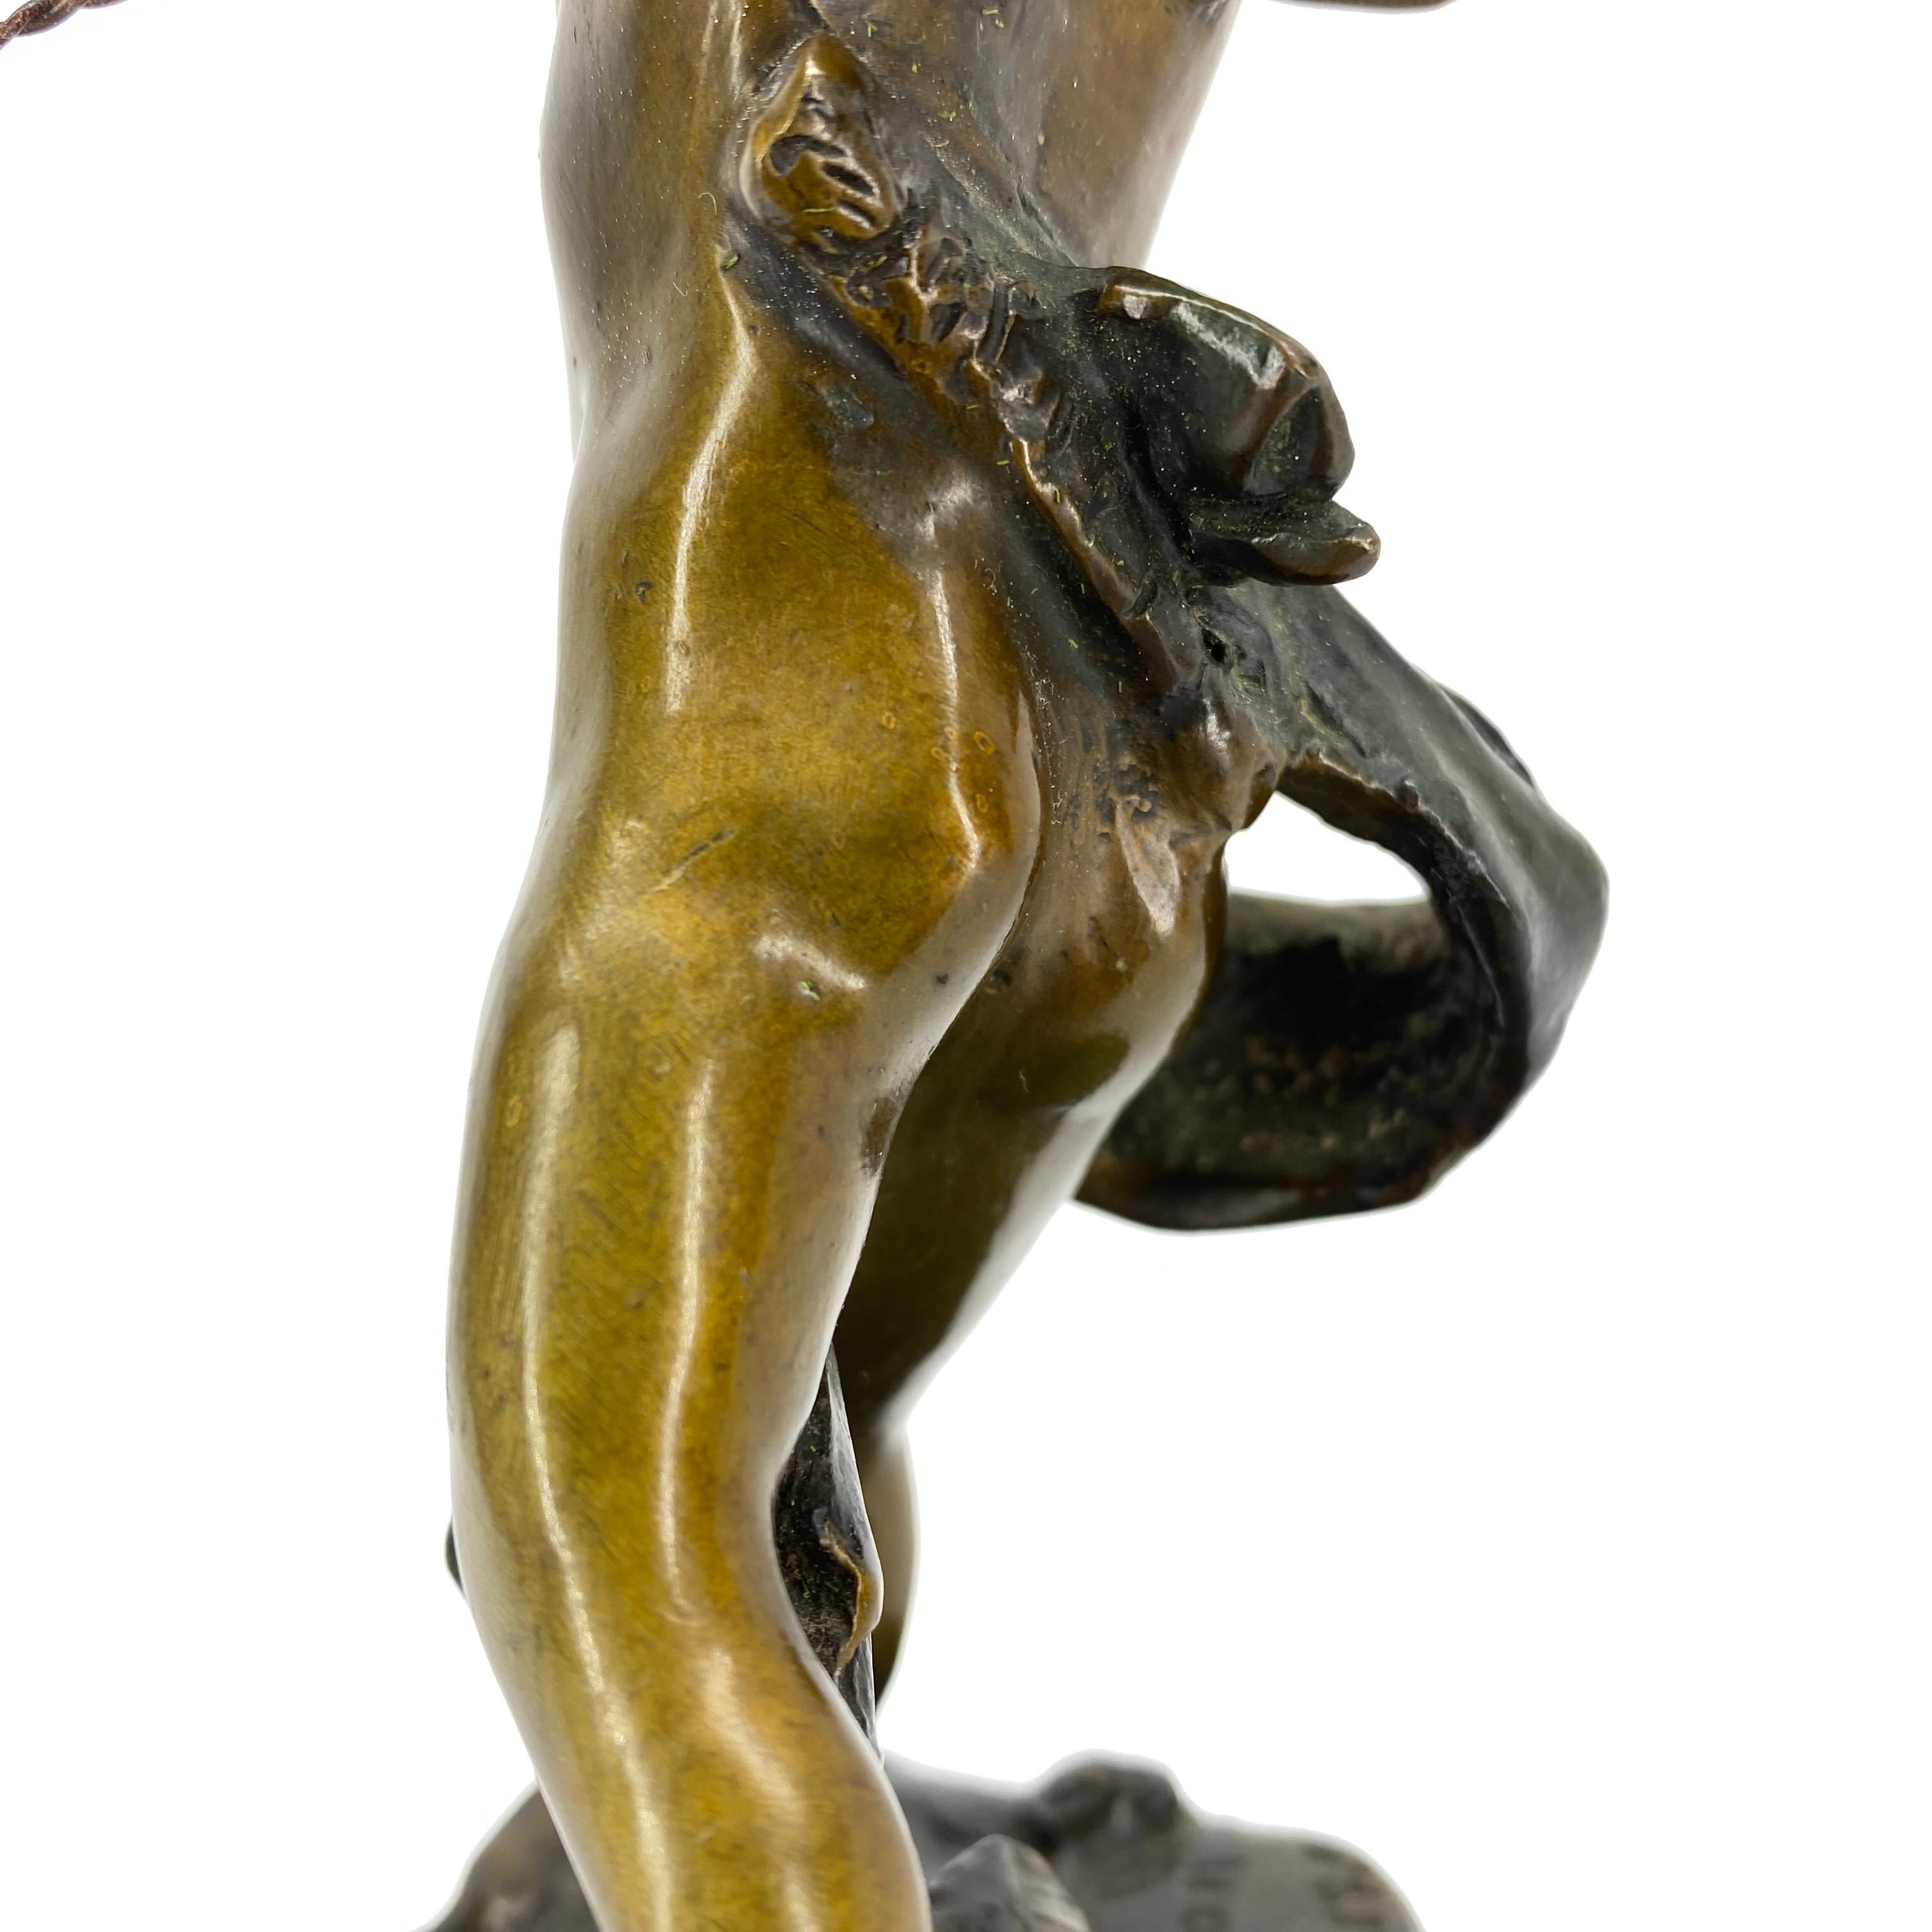 Hand-Crafted Vintage Bronze Sculpture of Cupid on Black Marble Base after Houdon